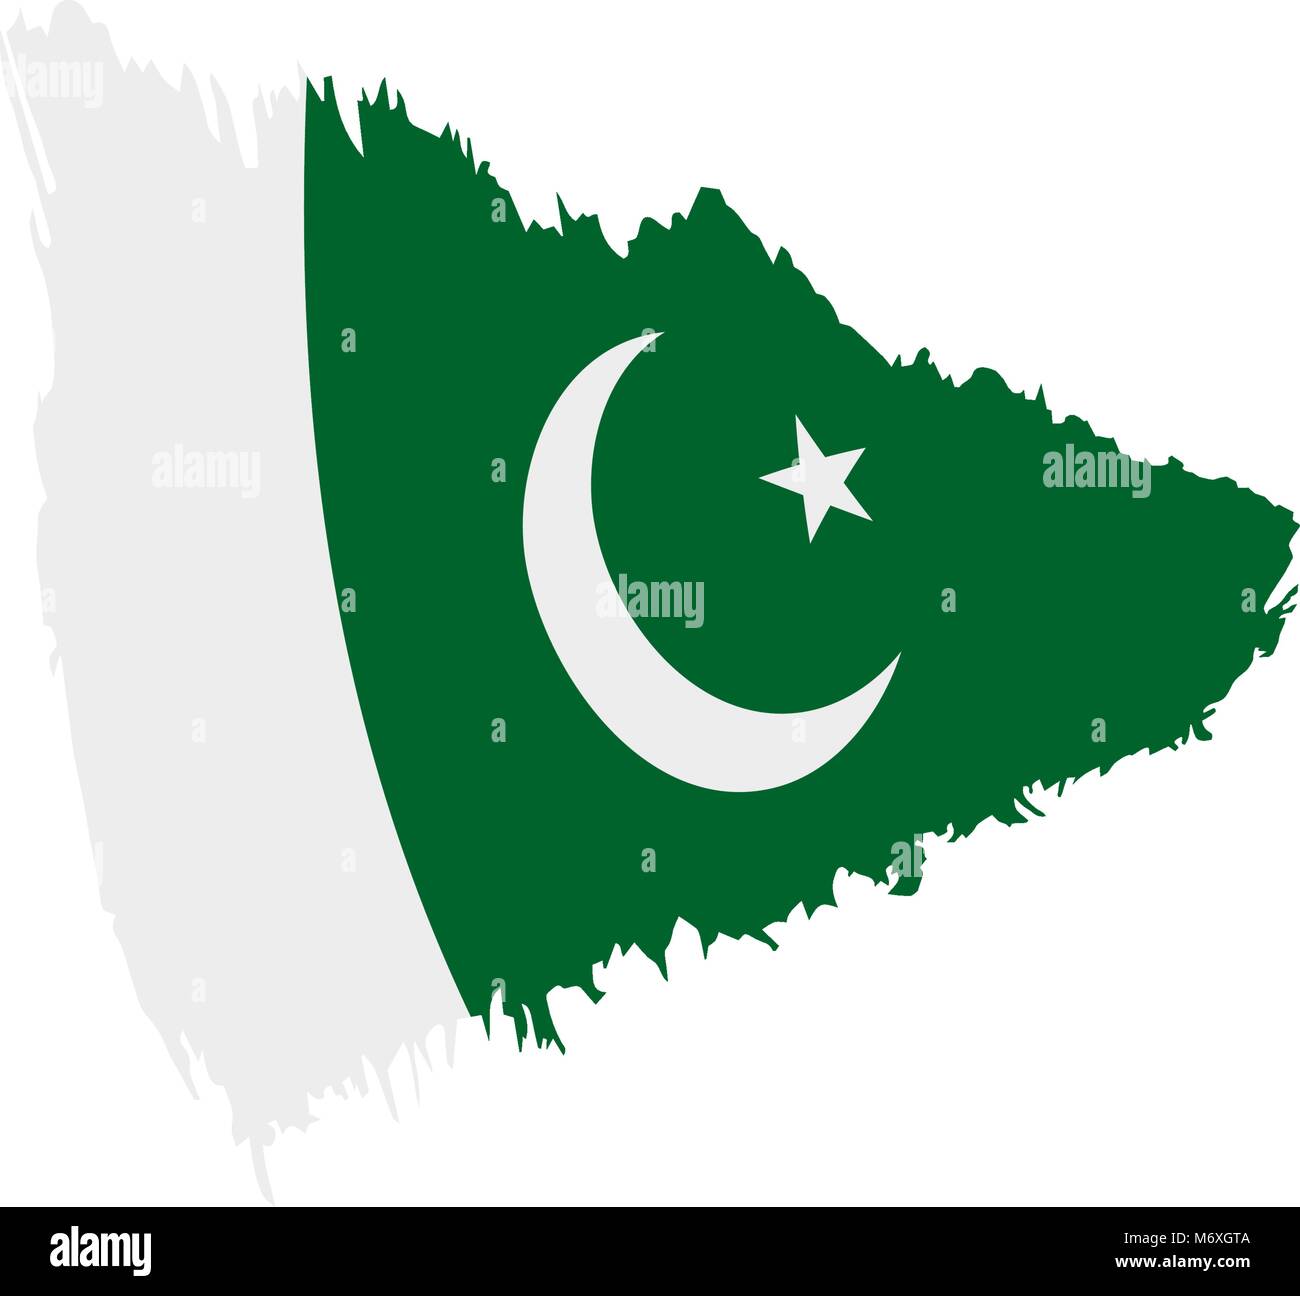 How to draw the National Flag of Pakistan